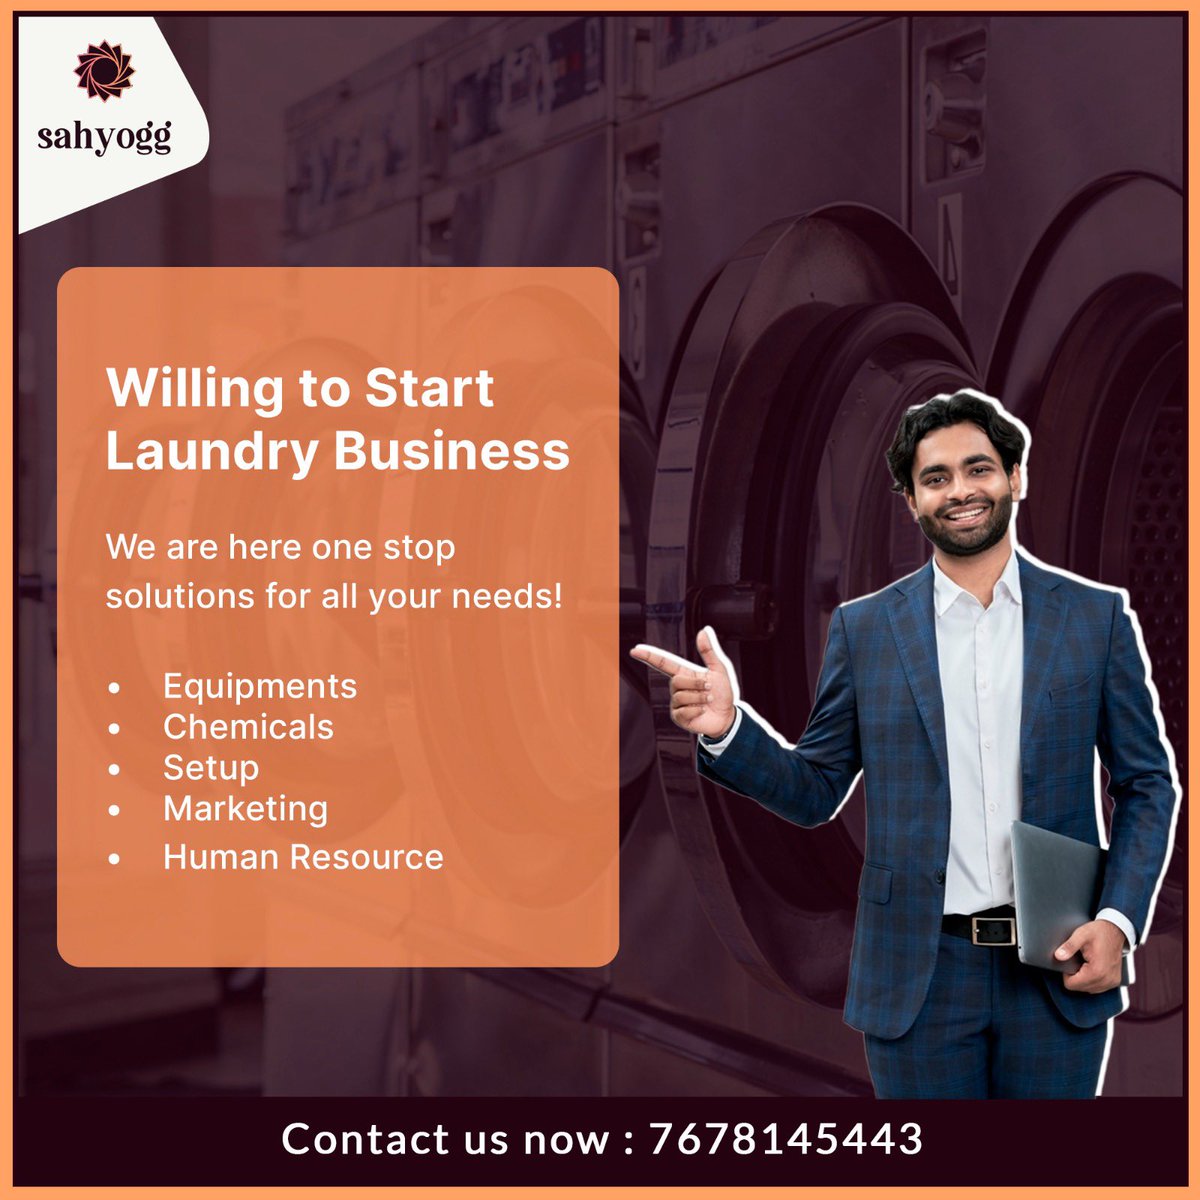 Willing to start your own laundry business?
We have one stop solutions for all your problems!
Call us now on 7678145443

#sahyogg #laundrybusiness #laundry #franchiseindia #franchiseopportunities #laundryequipments #laundrychemicals #brandsolutions #yourguide #yourconsultant